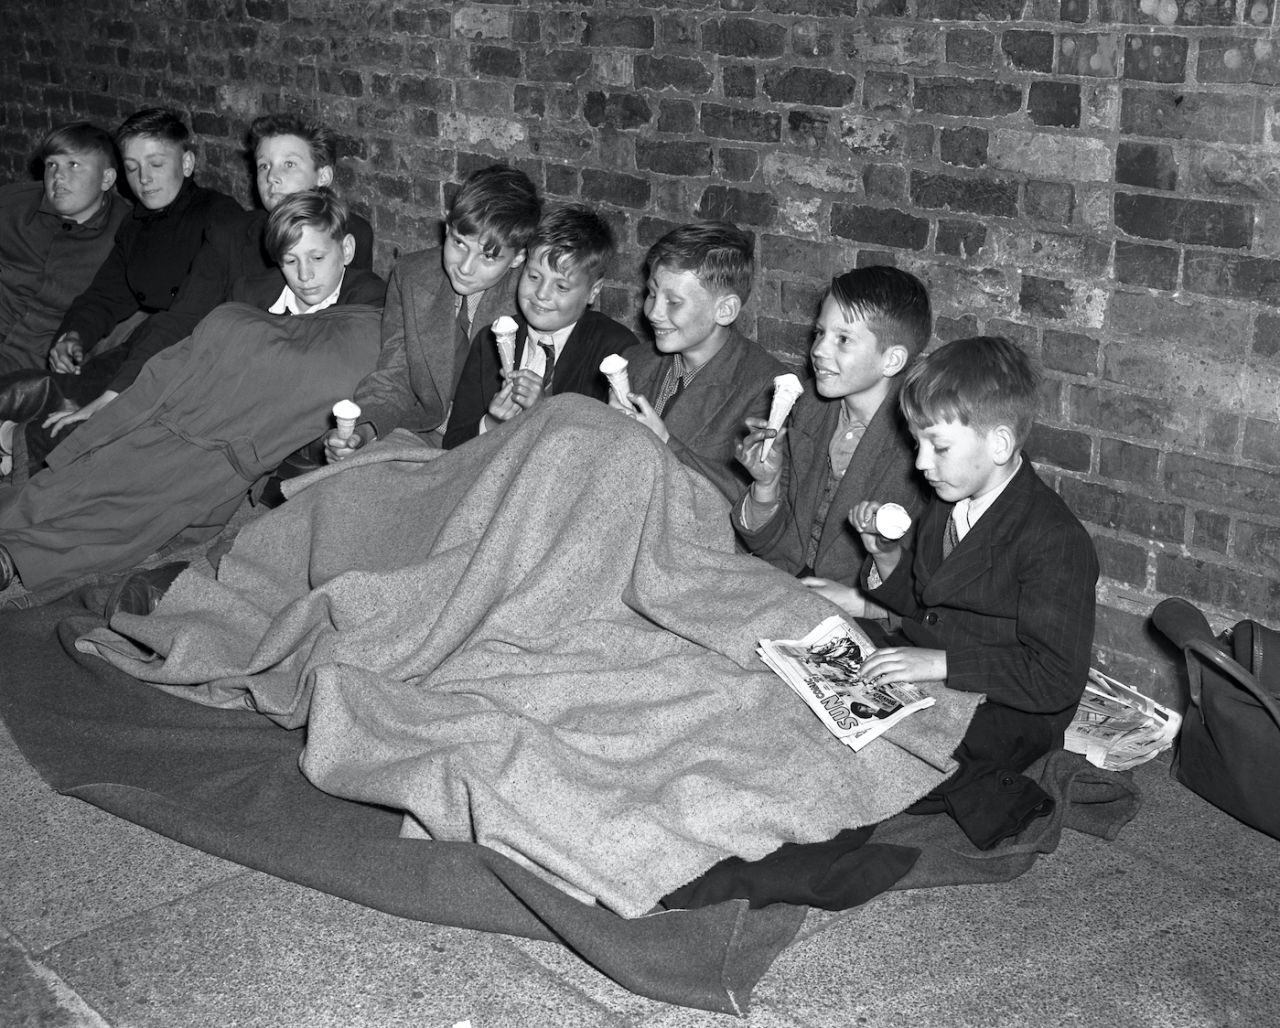 Schoolchildren enjoy ice cream before settling down for the night as they queue at The Oval in the hope of seeing the match, fifth Test, England vs Australia, August 14, 1953